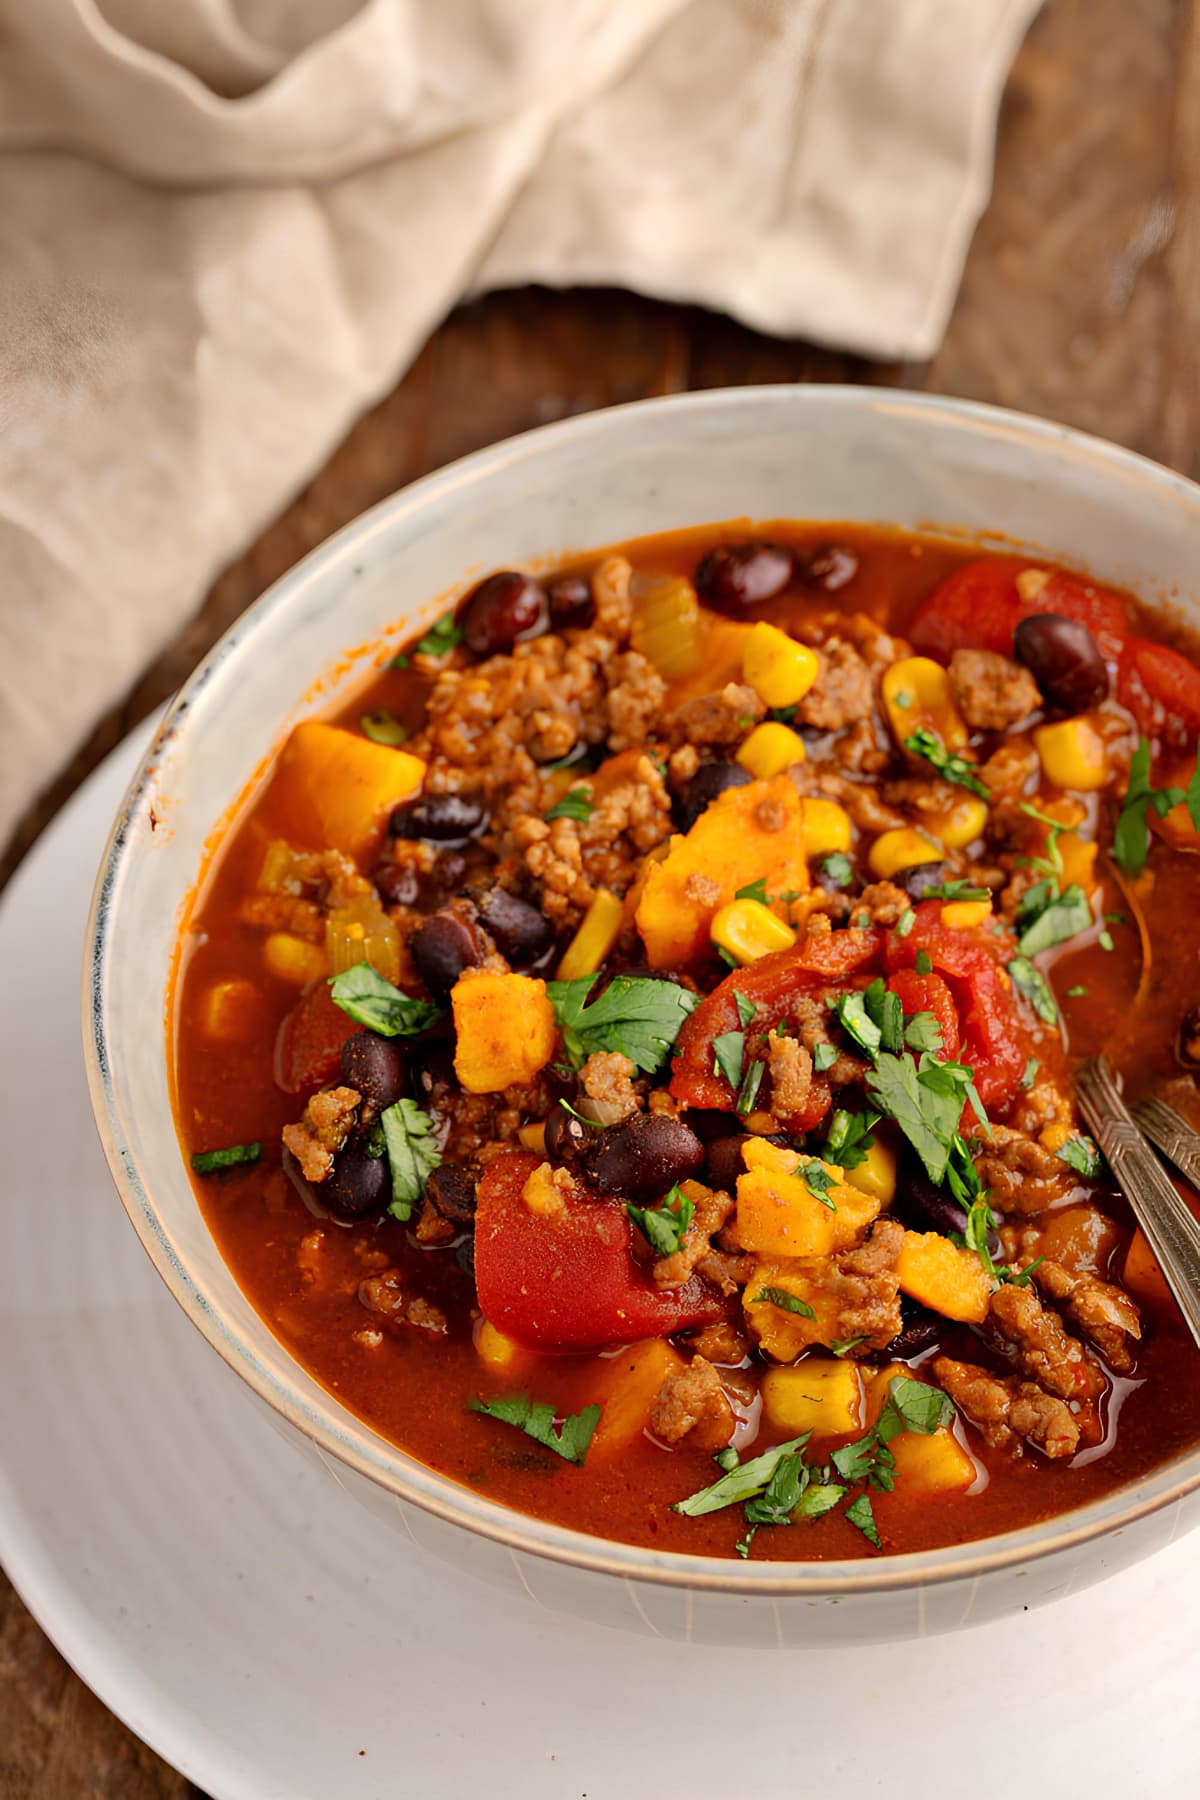 Homemade Sweet Potato Chili with Ground Beef, Beans and Corn in a Bowl